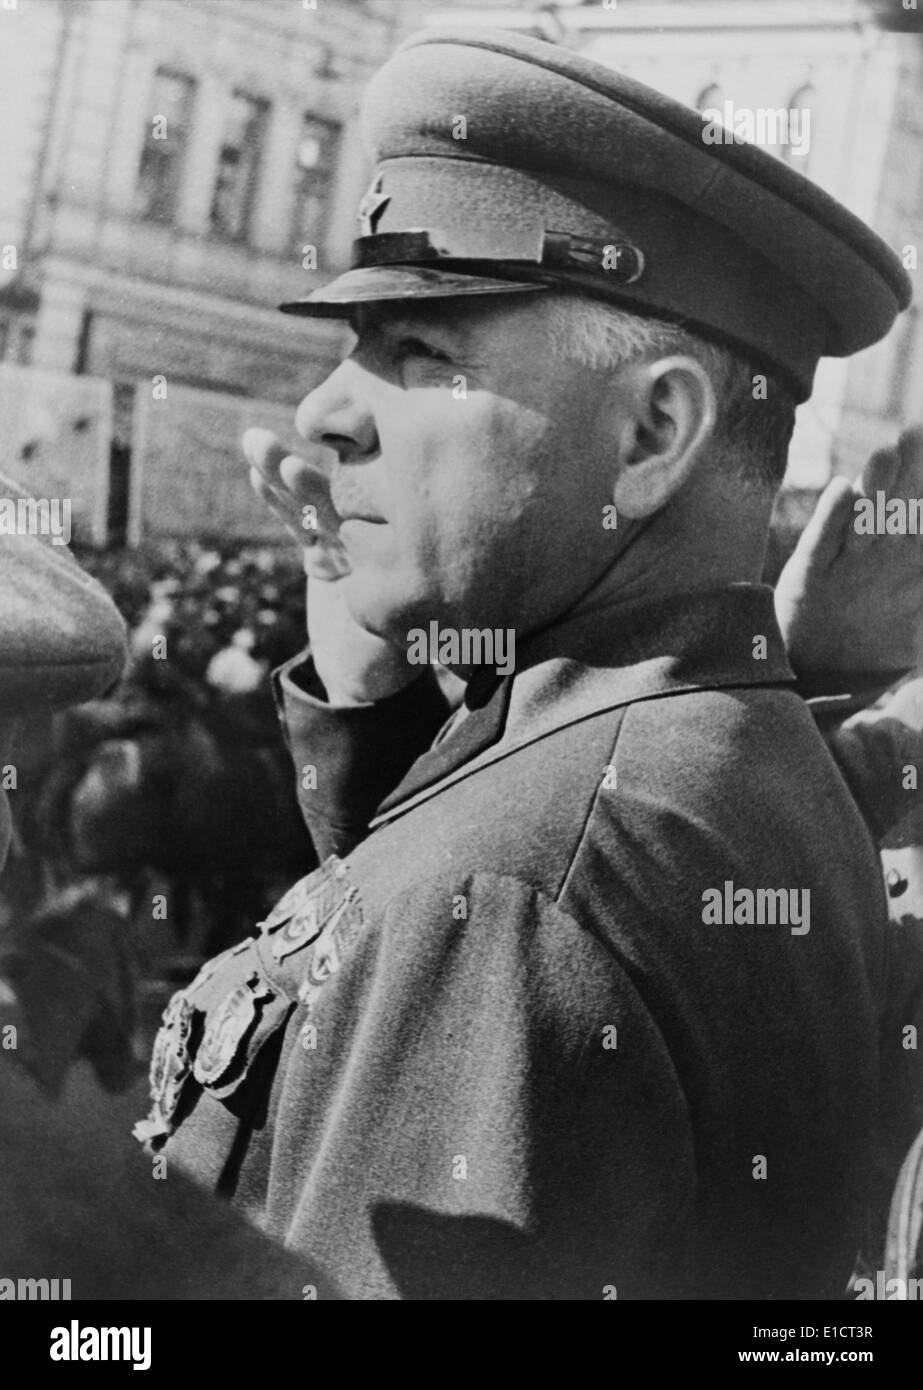 Marshal Zhukov saluting while reviewing a Russian military parade. Unknown location. Ca. 1945. Photo by Georgii Zelma. Stock Photo